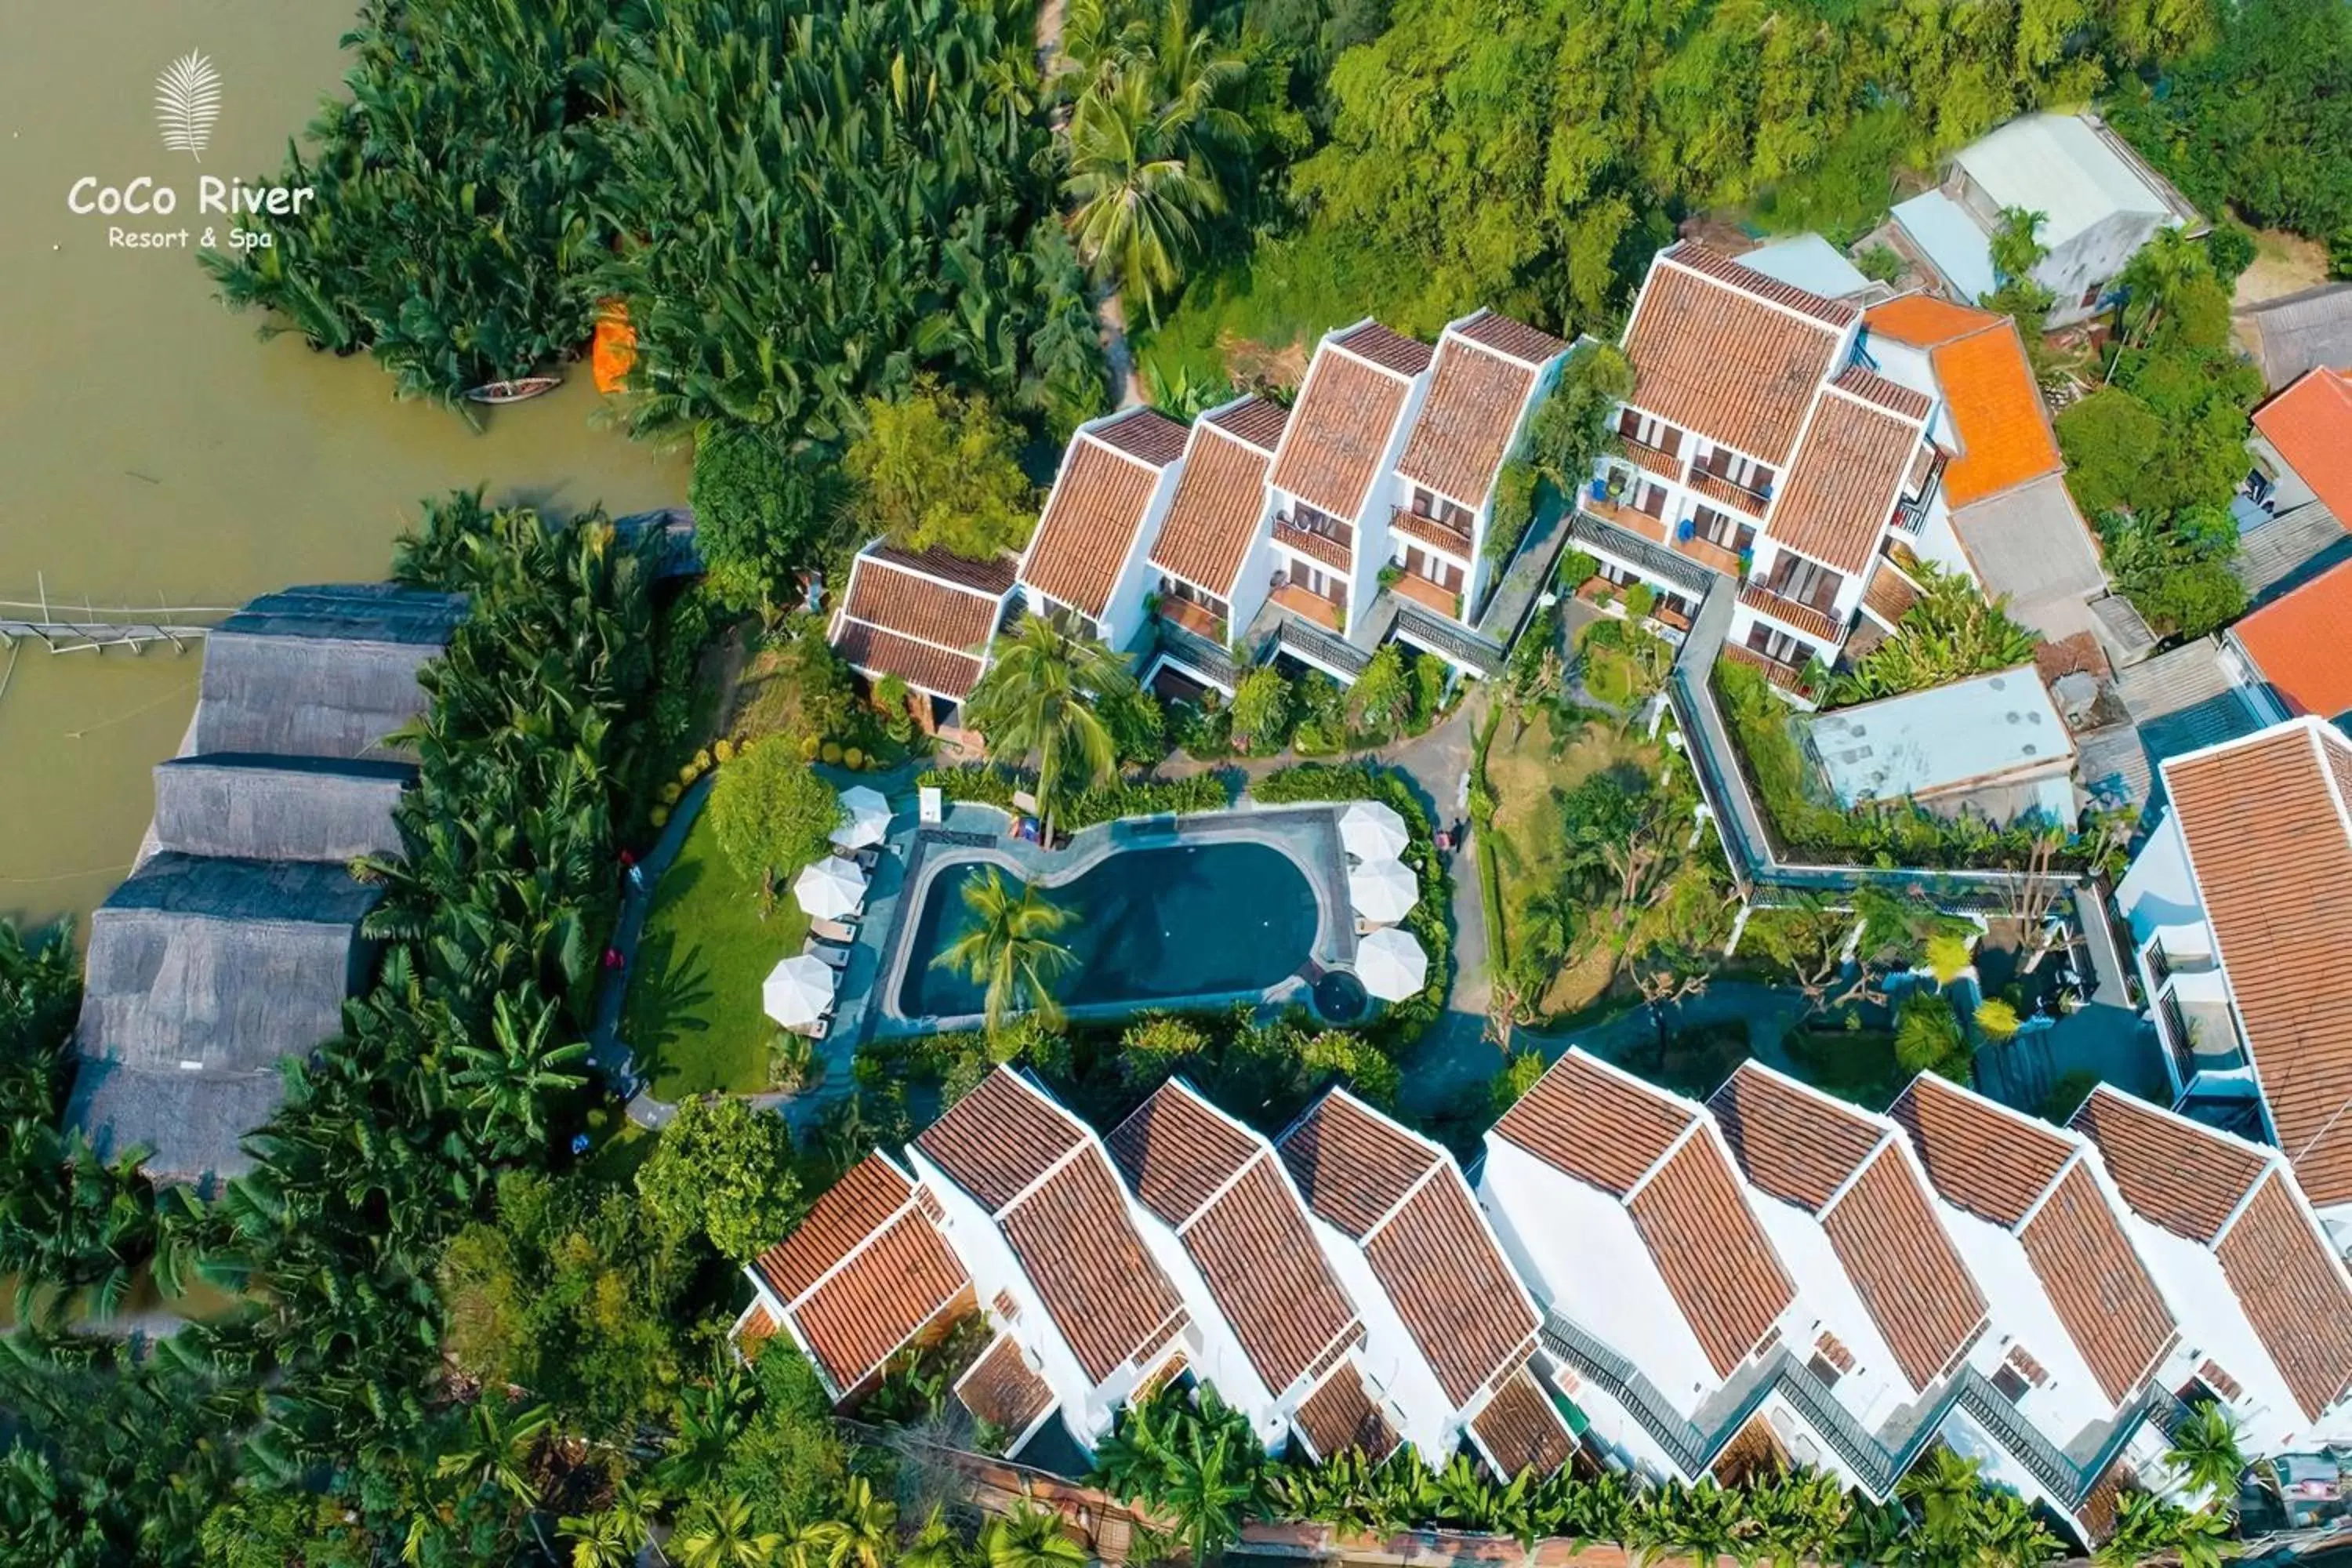 Property building, Bird's-eye View in Hoi An Coco River Resort & Spa